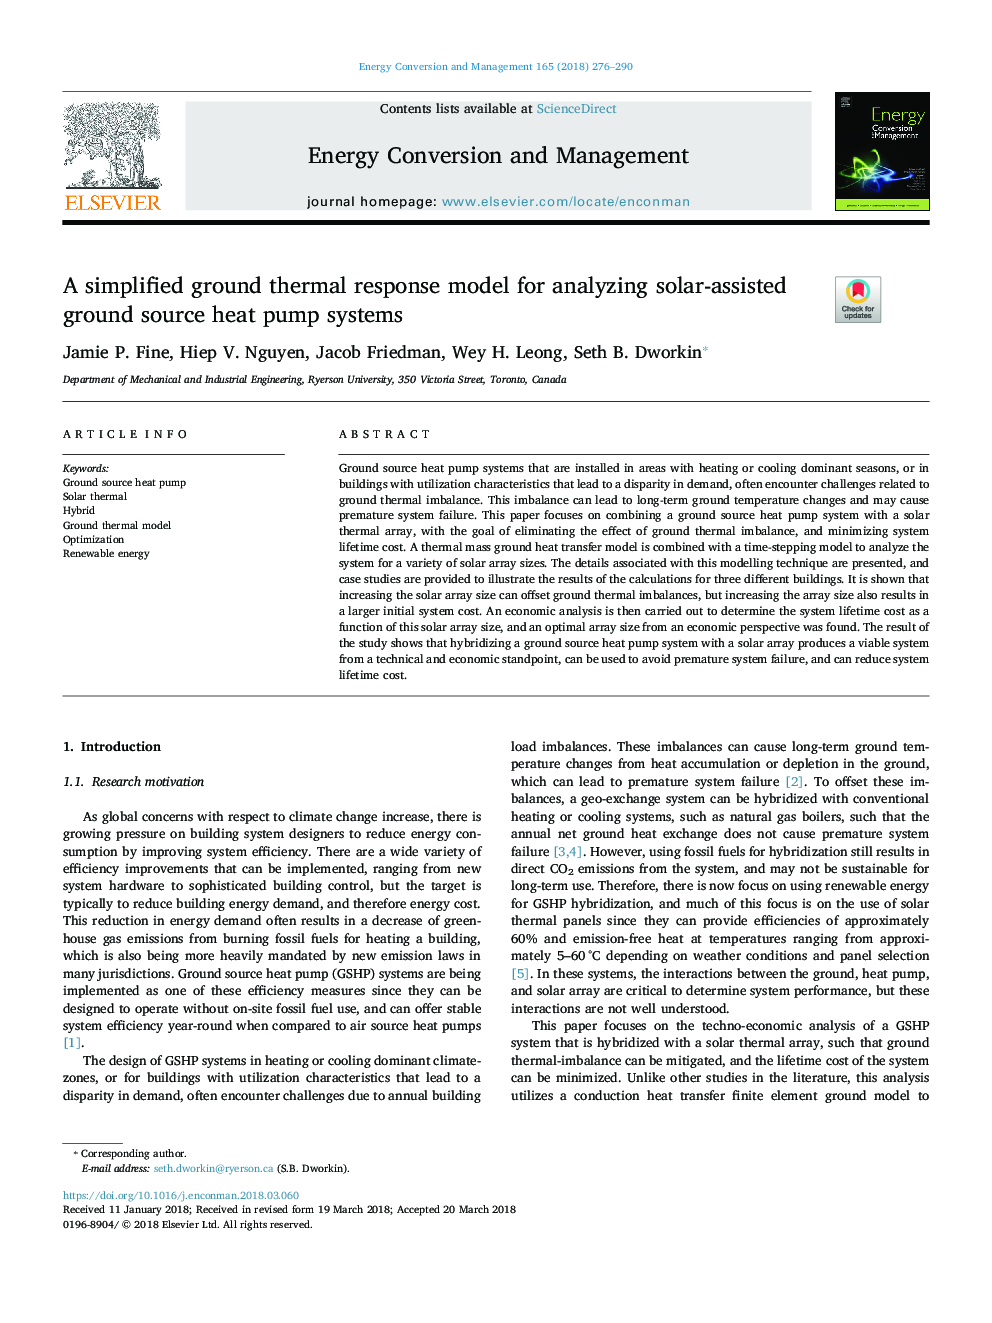 A simplified ground thermal response model for analyzing solar-assisted ground source heat pump systems